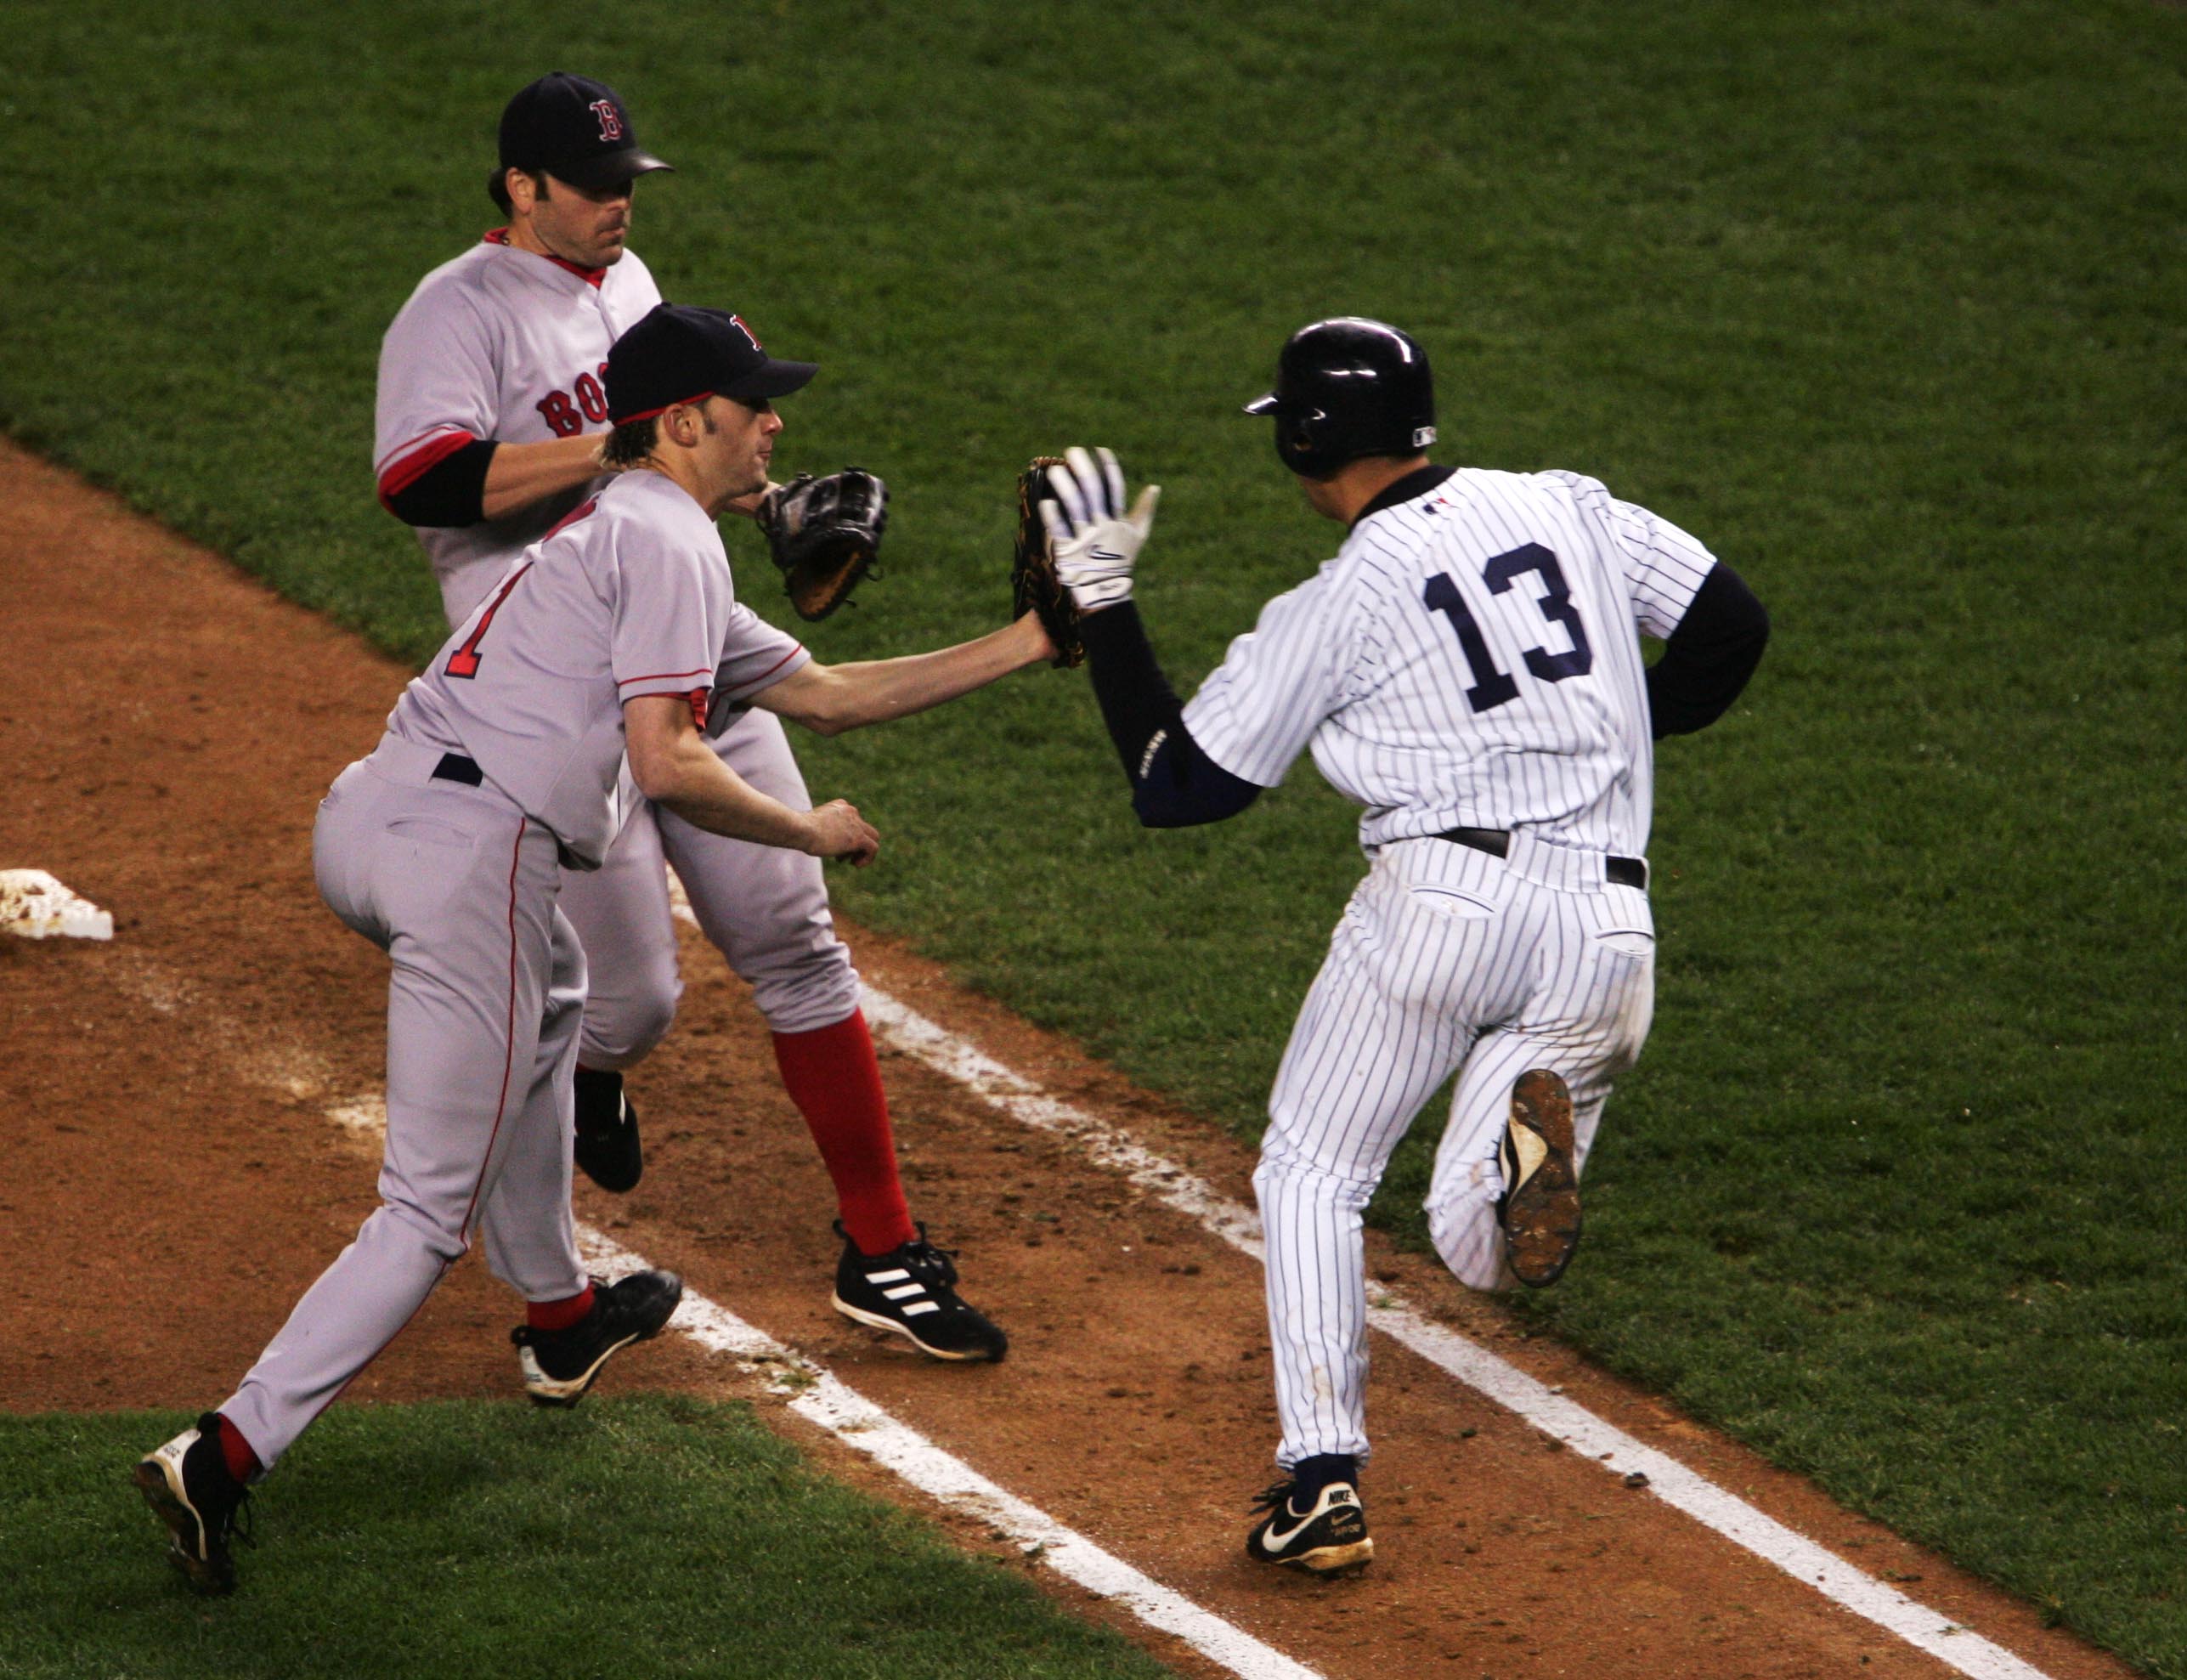 NEW YORK - OCTOBER 19:  Pitcher Bronson Arroyo #61 of the Boston Red Sox has the ball knocked out of his glove by batter Alex Rodriguez #13 of the New York Yankees on a tag-out at first base as first baseman Kevin Millar #15 looks on in the eighth inning